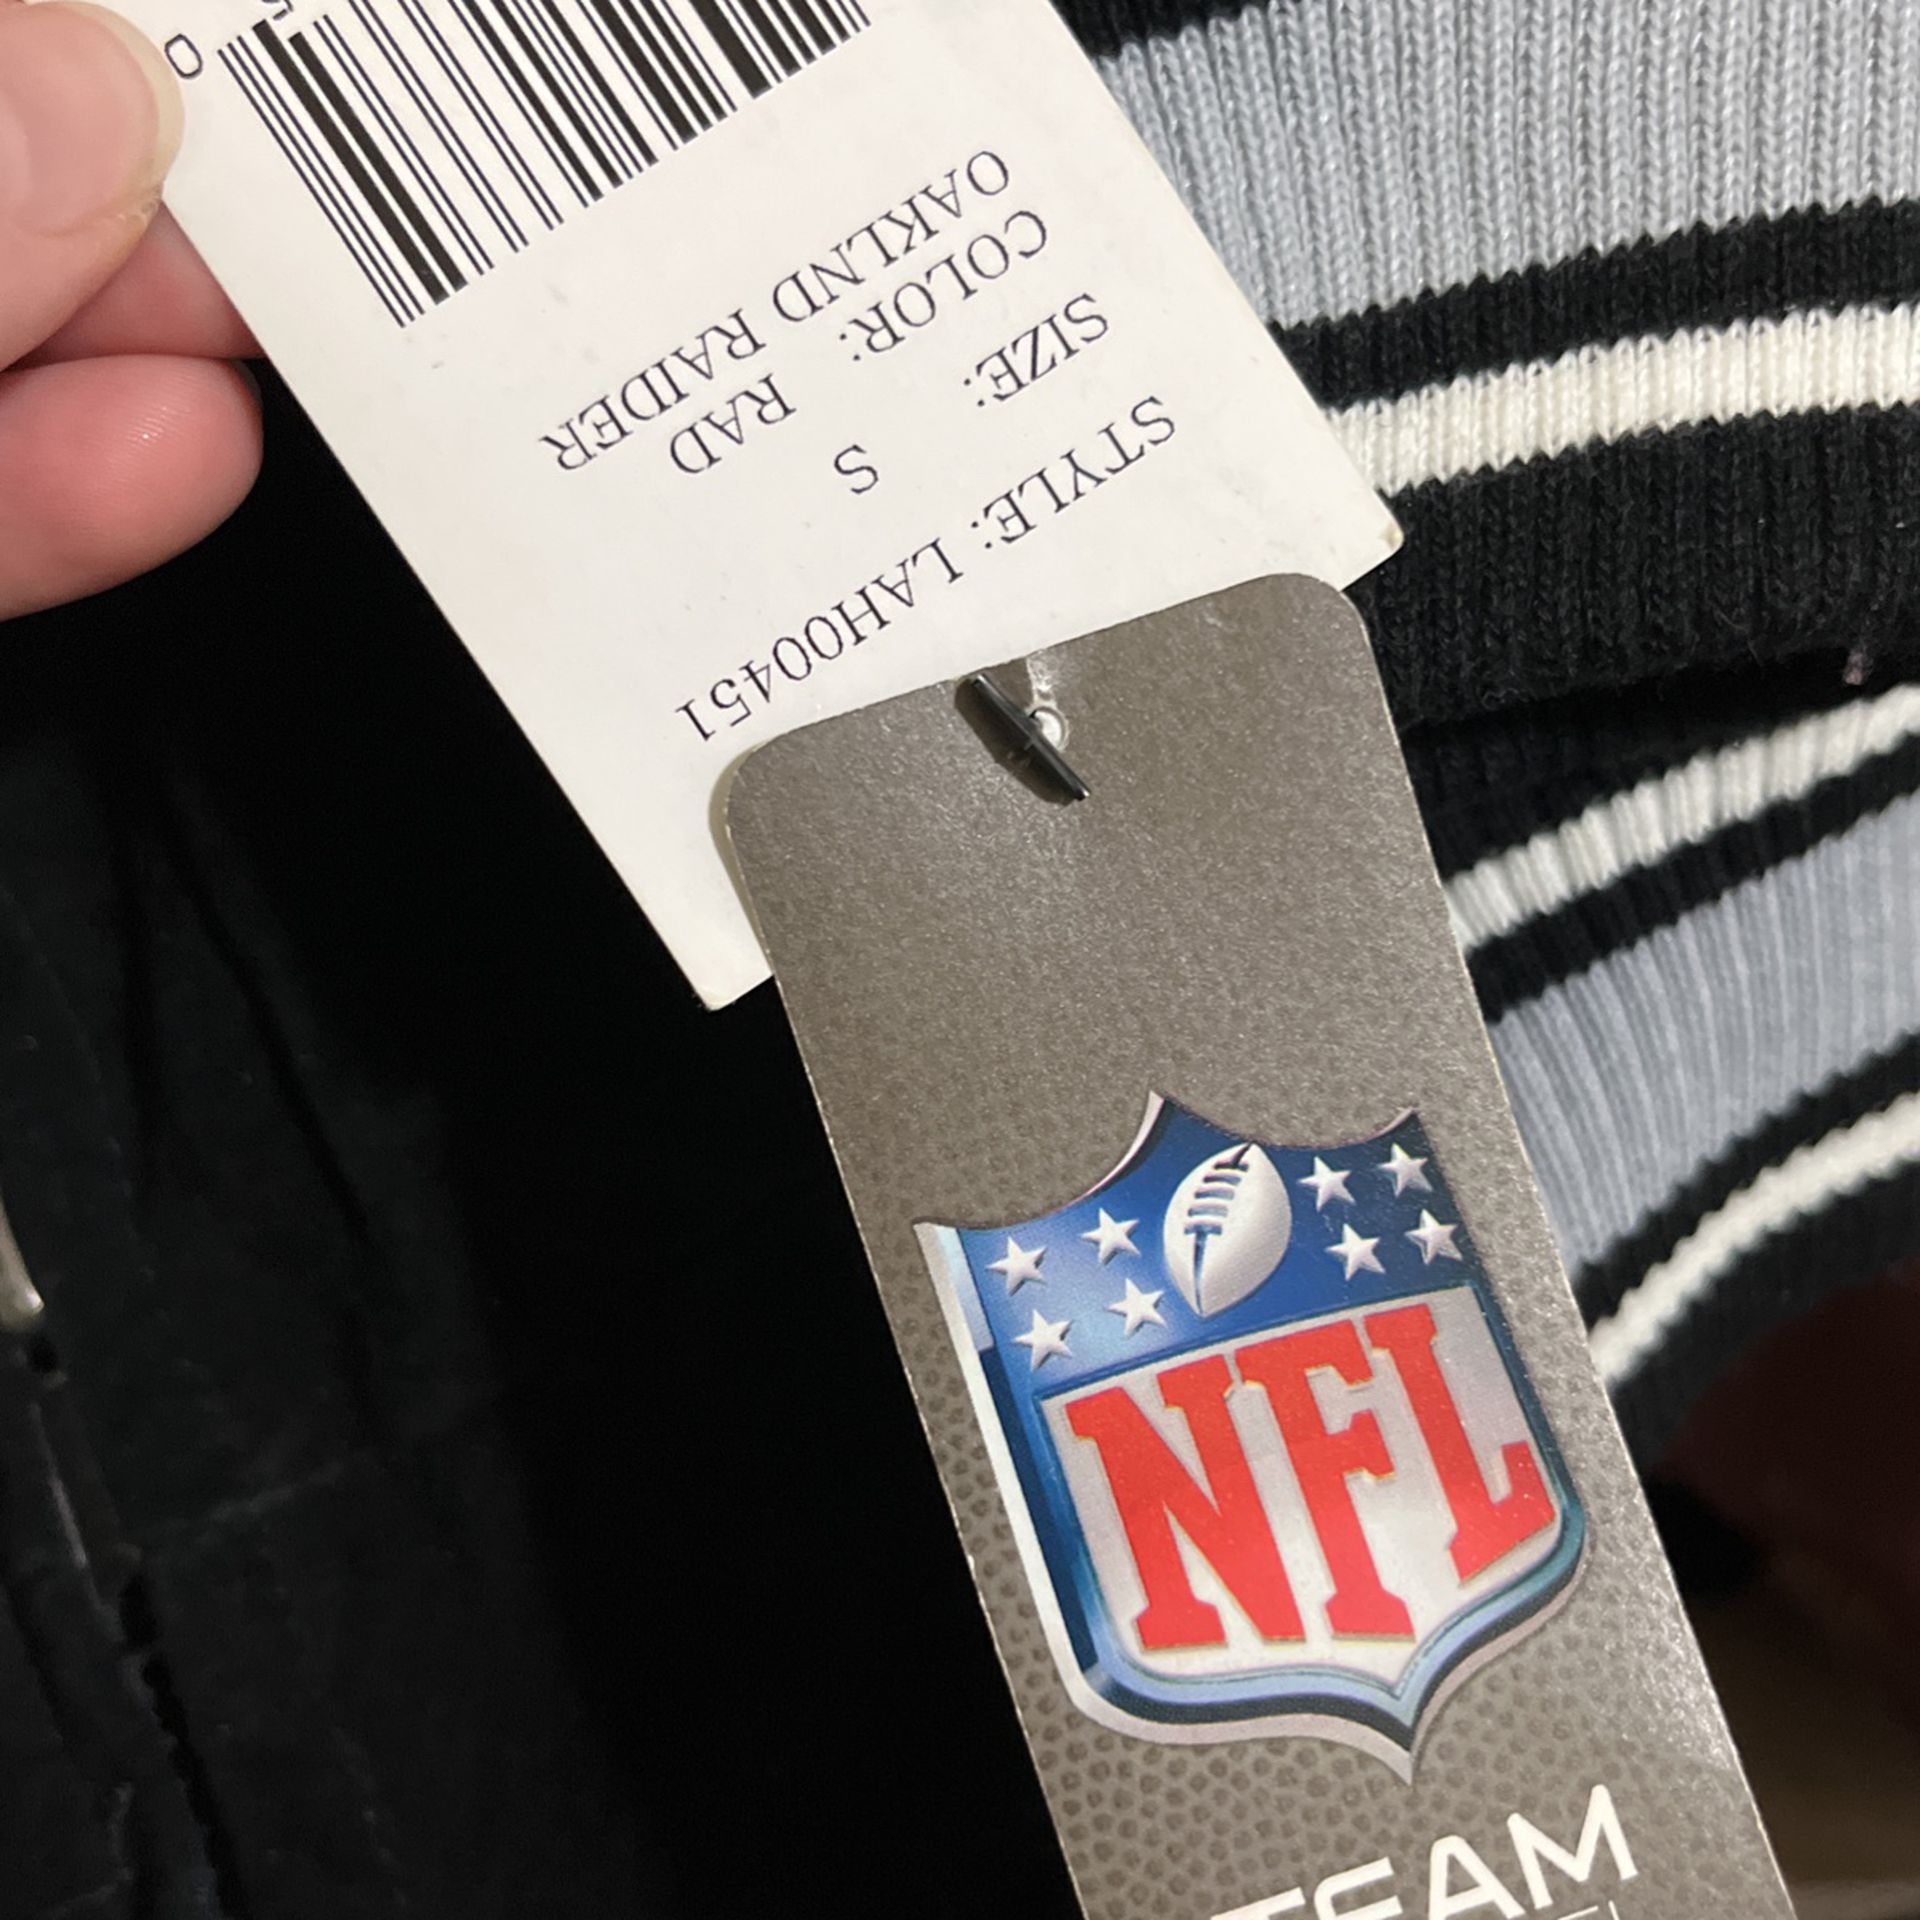 Las Vegas Raiders Jacket Authentic Brand New for Sale in Fresno, CA -  OfferUp